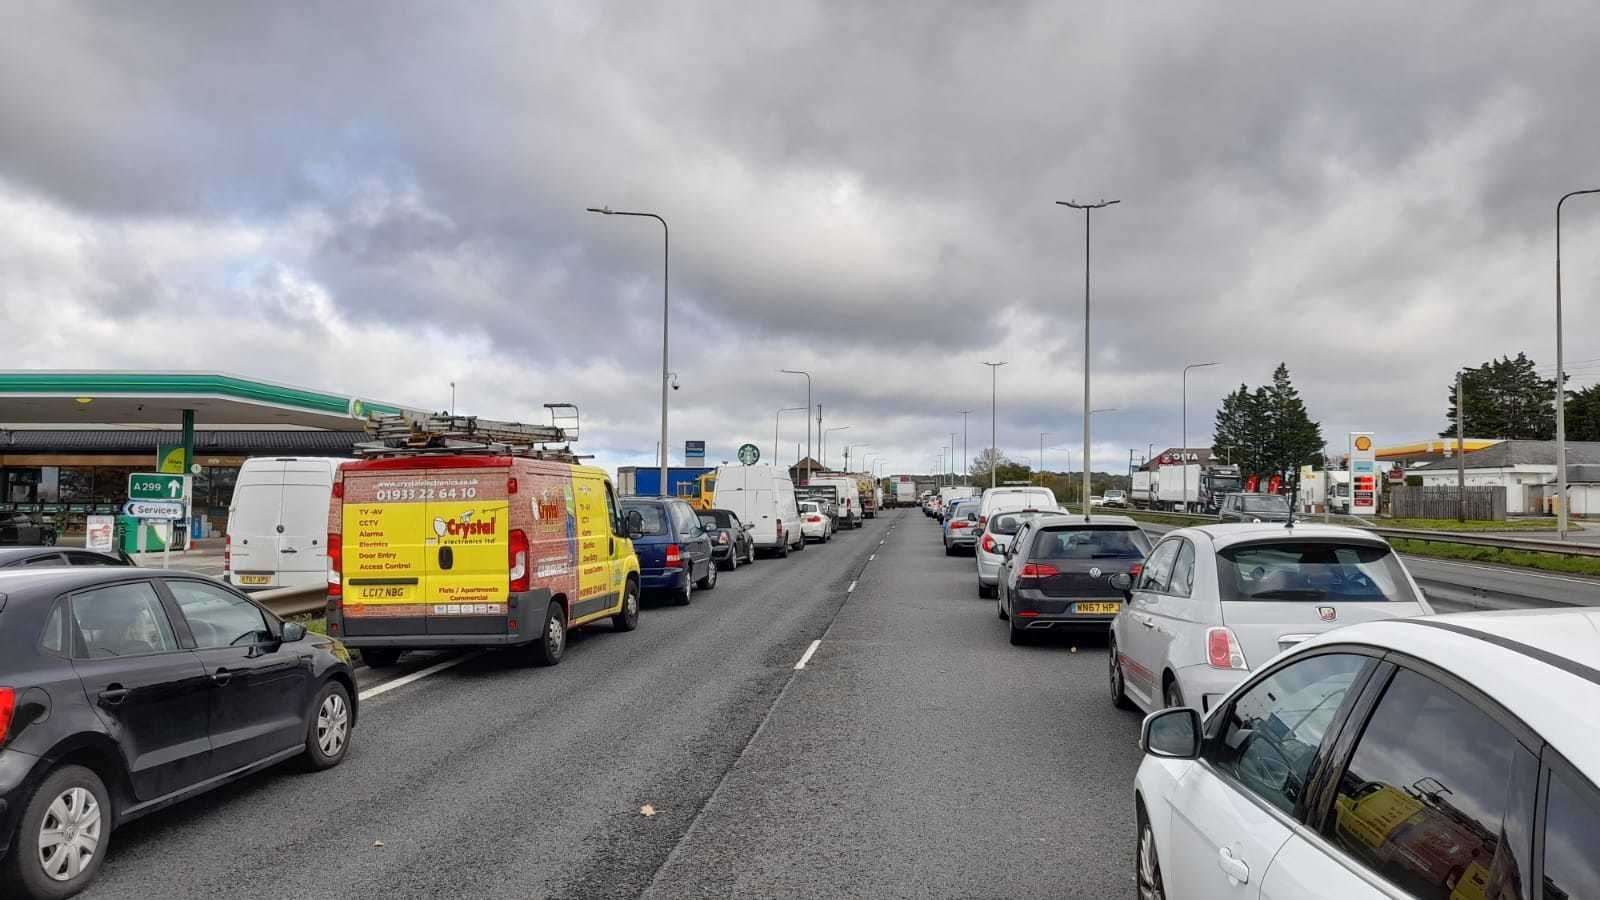 Drivers have been stuck for more than hour on the Thanet Way